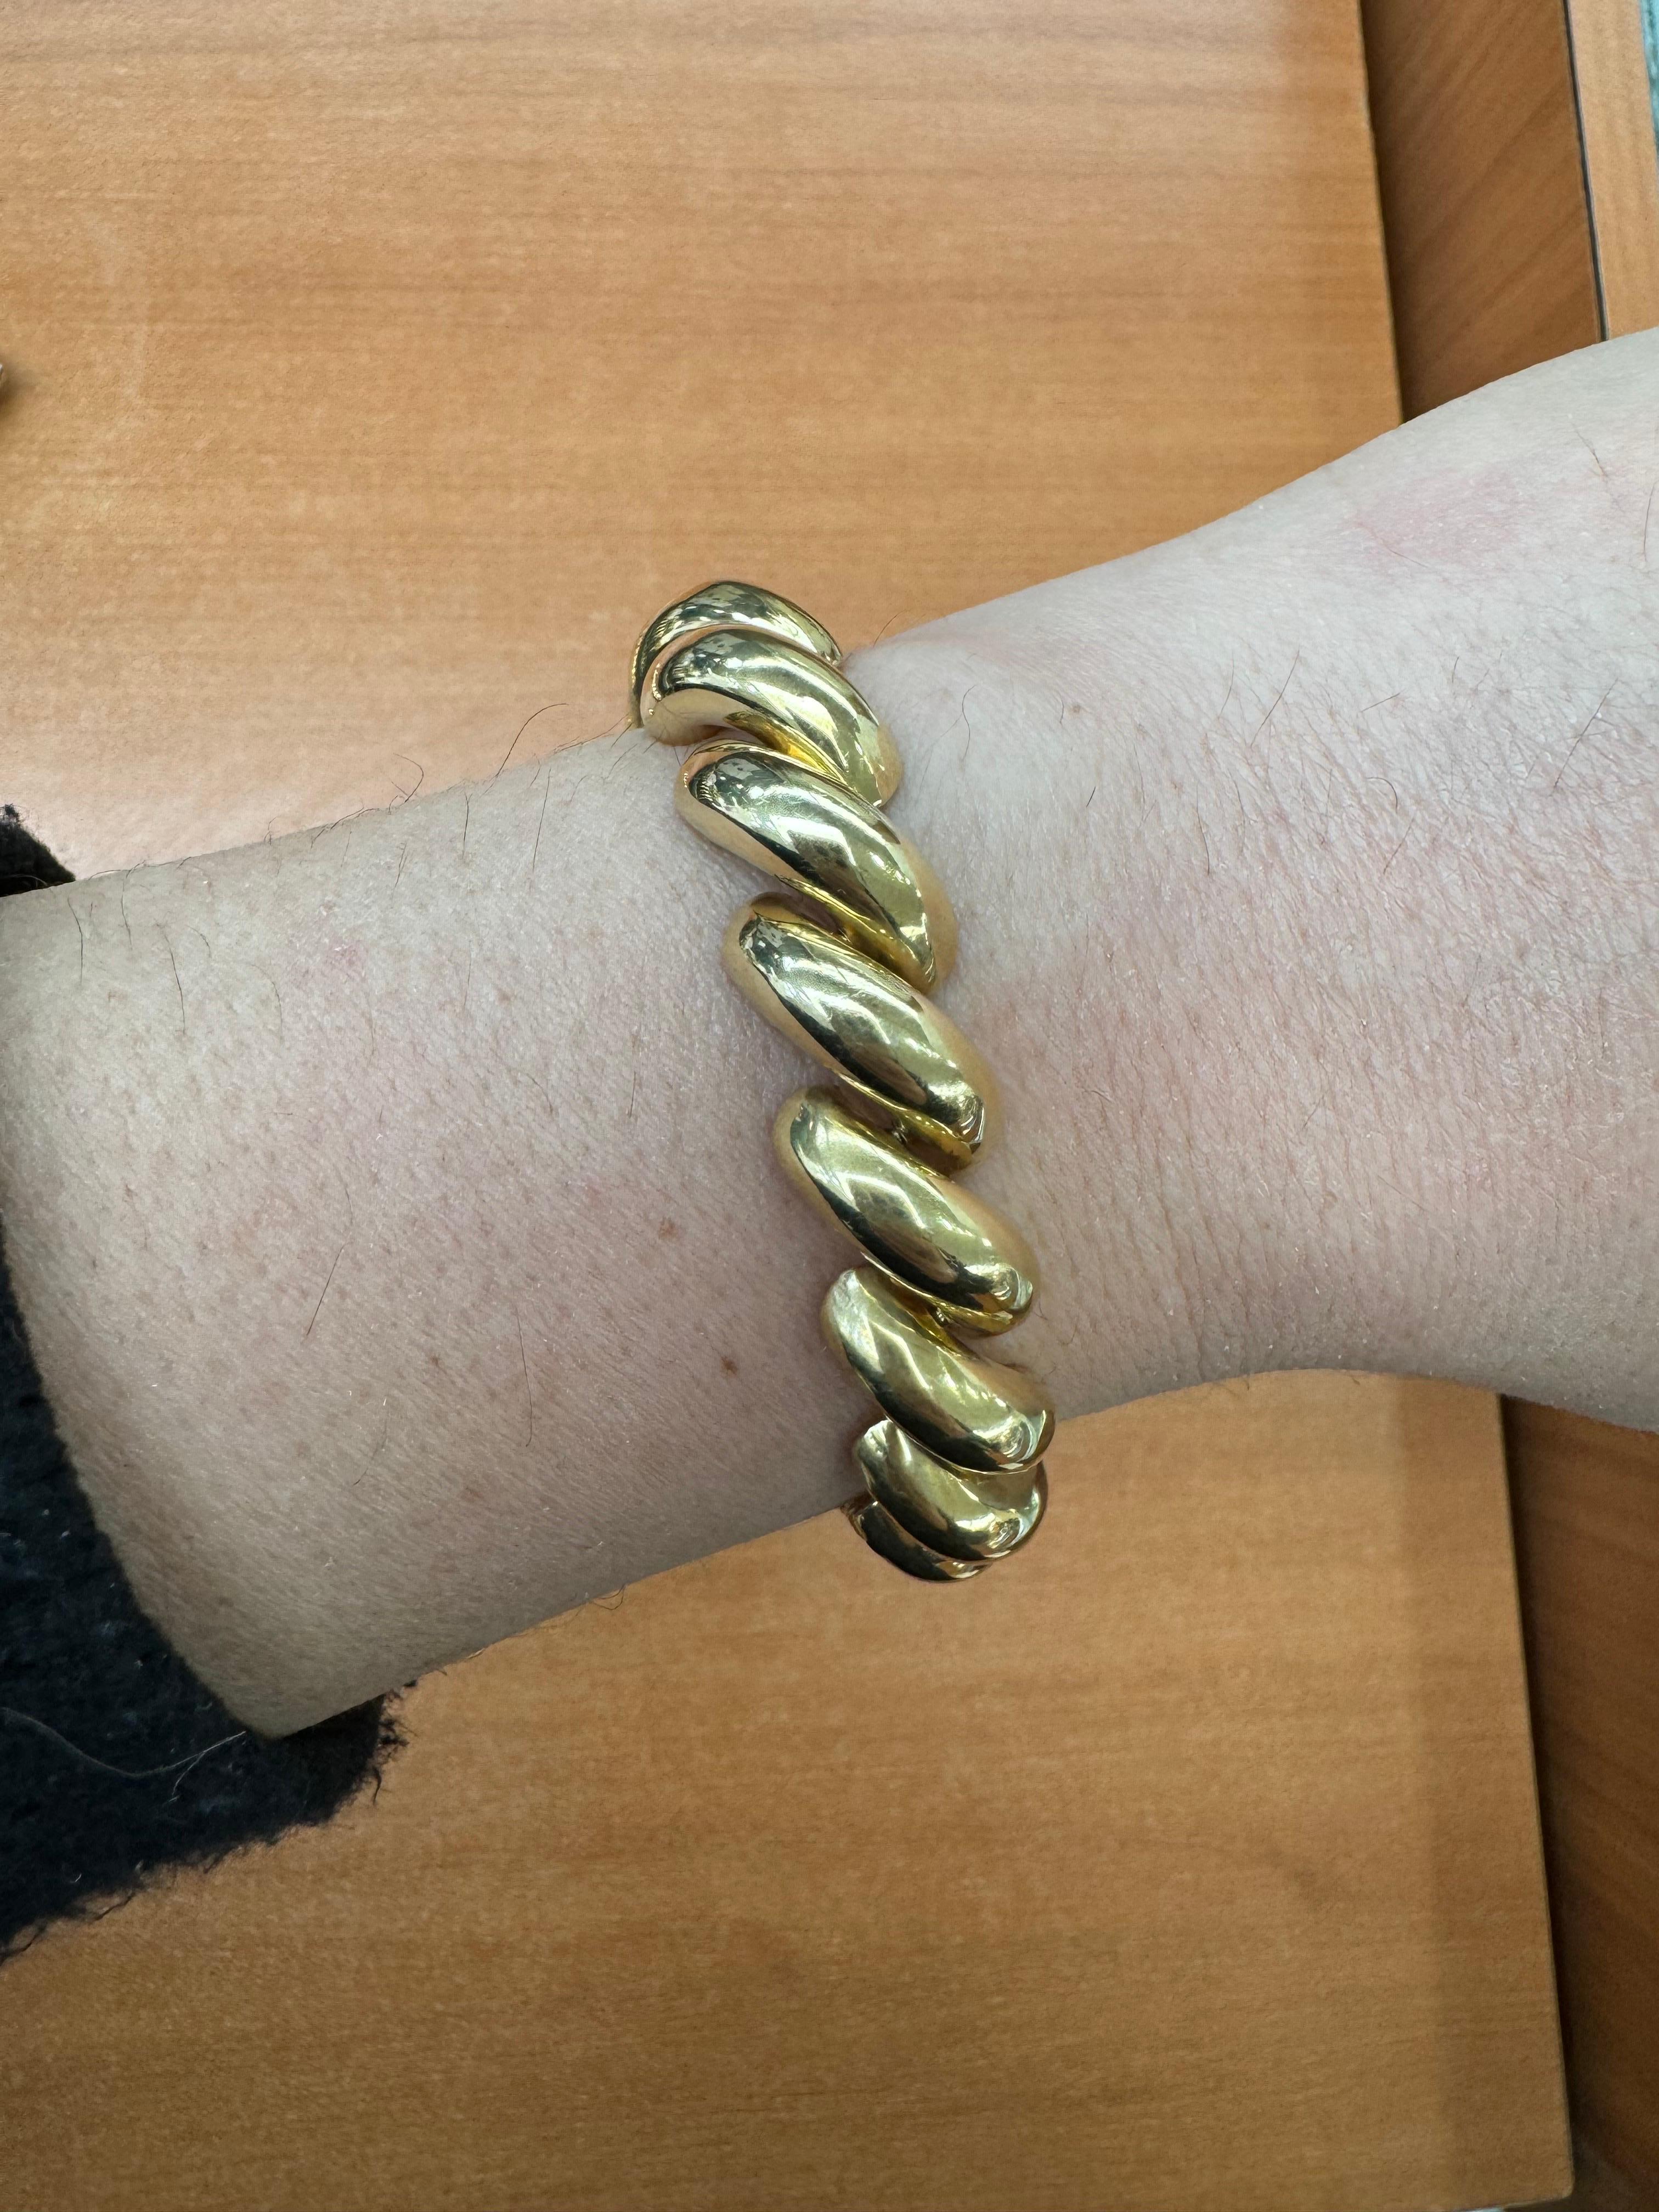 San Marco High Polish Link Bracelet 14 Karat Yellow Gold 25.1 Grams Medium Size In Excellent Condition For Sale In New York, NY